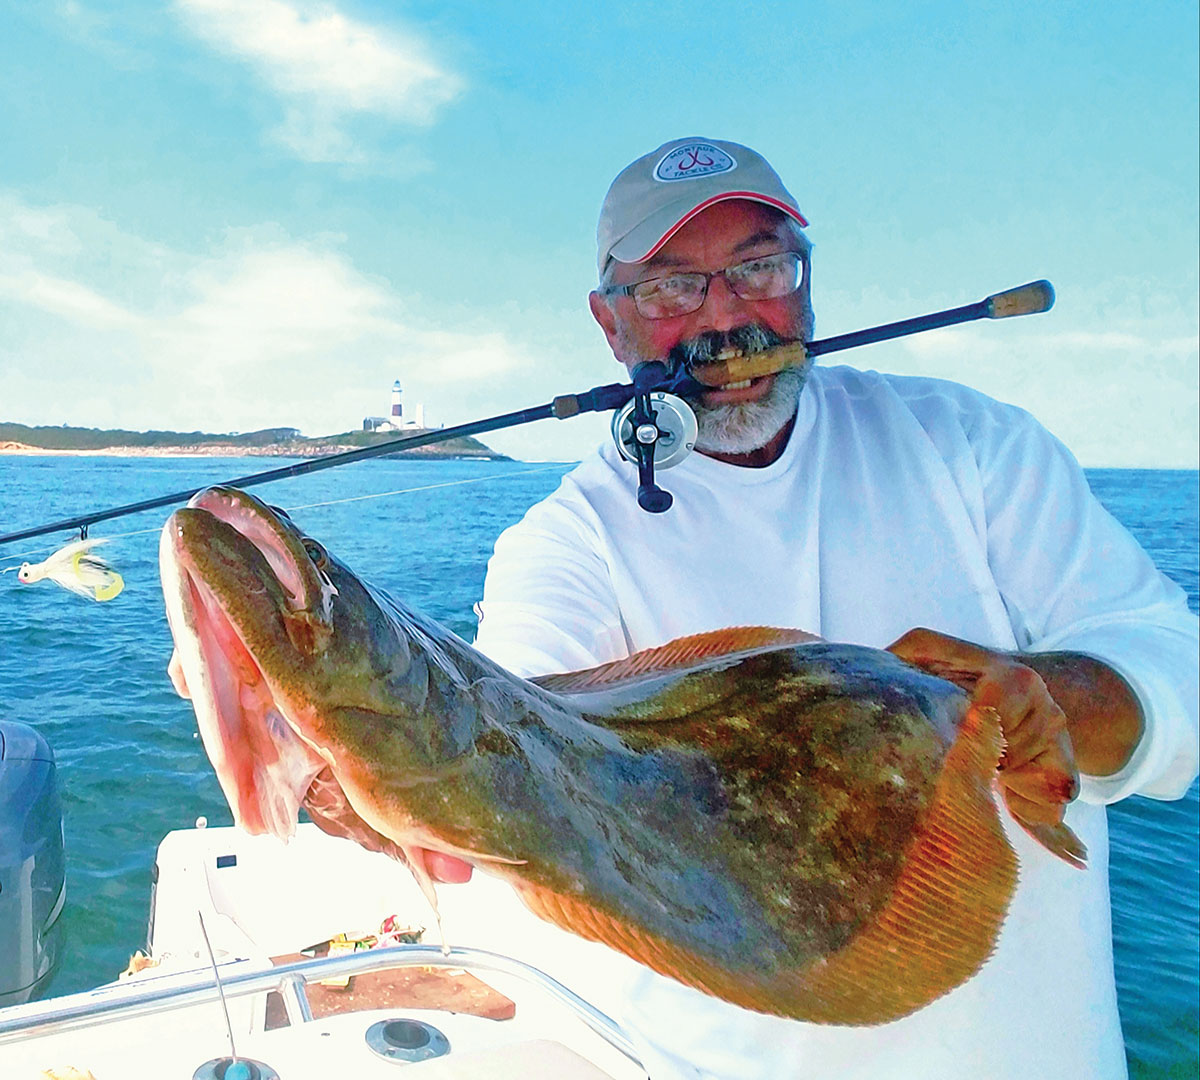 show up that huge fluke while holding the fishing rod with your teeth